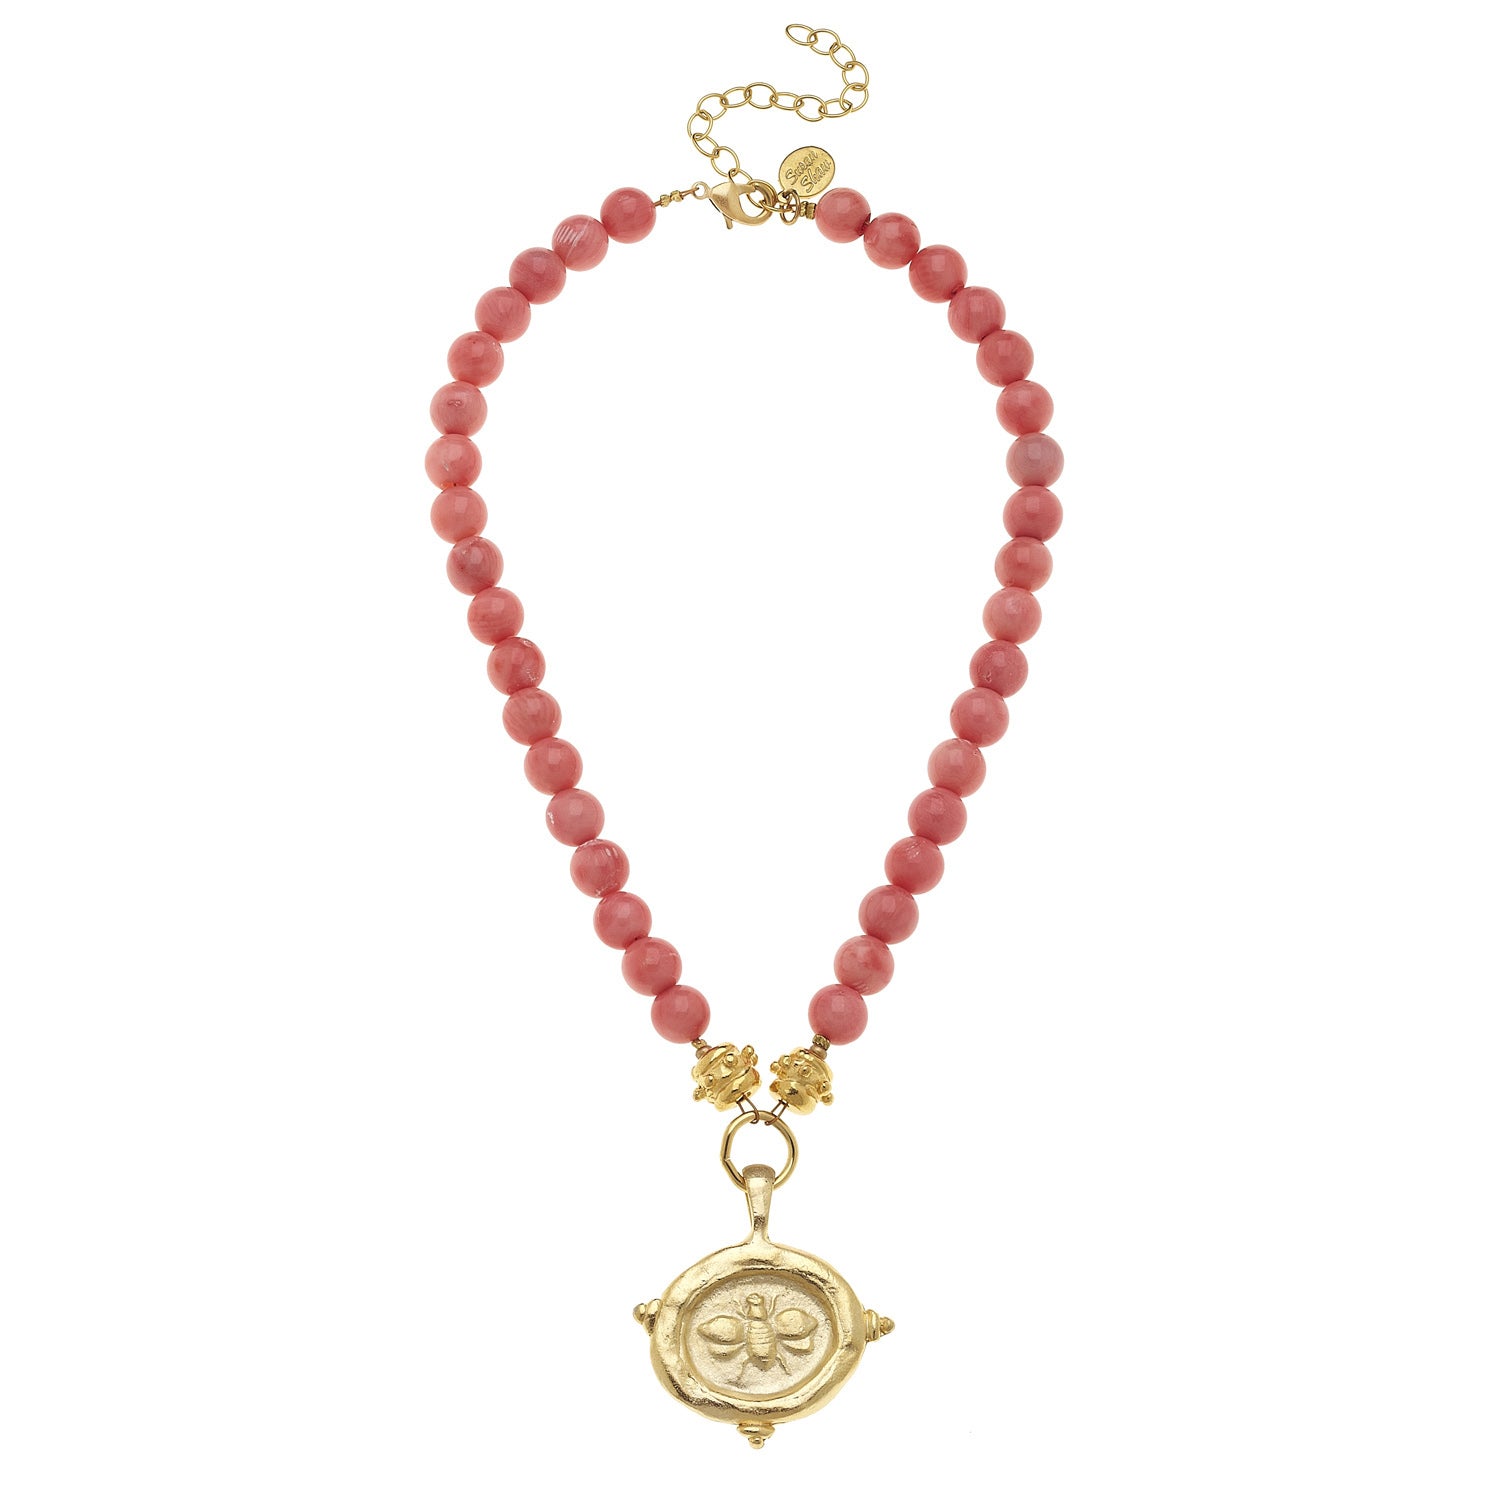 Susan Shaw Handcast Gold Bee Intaglio on Pink Coral Necklace